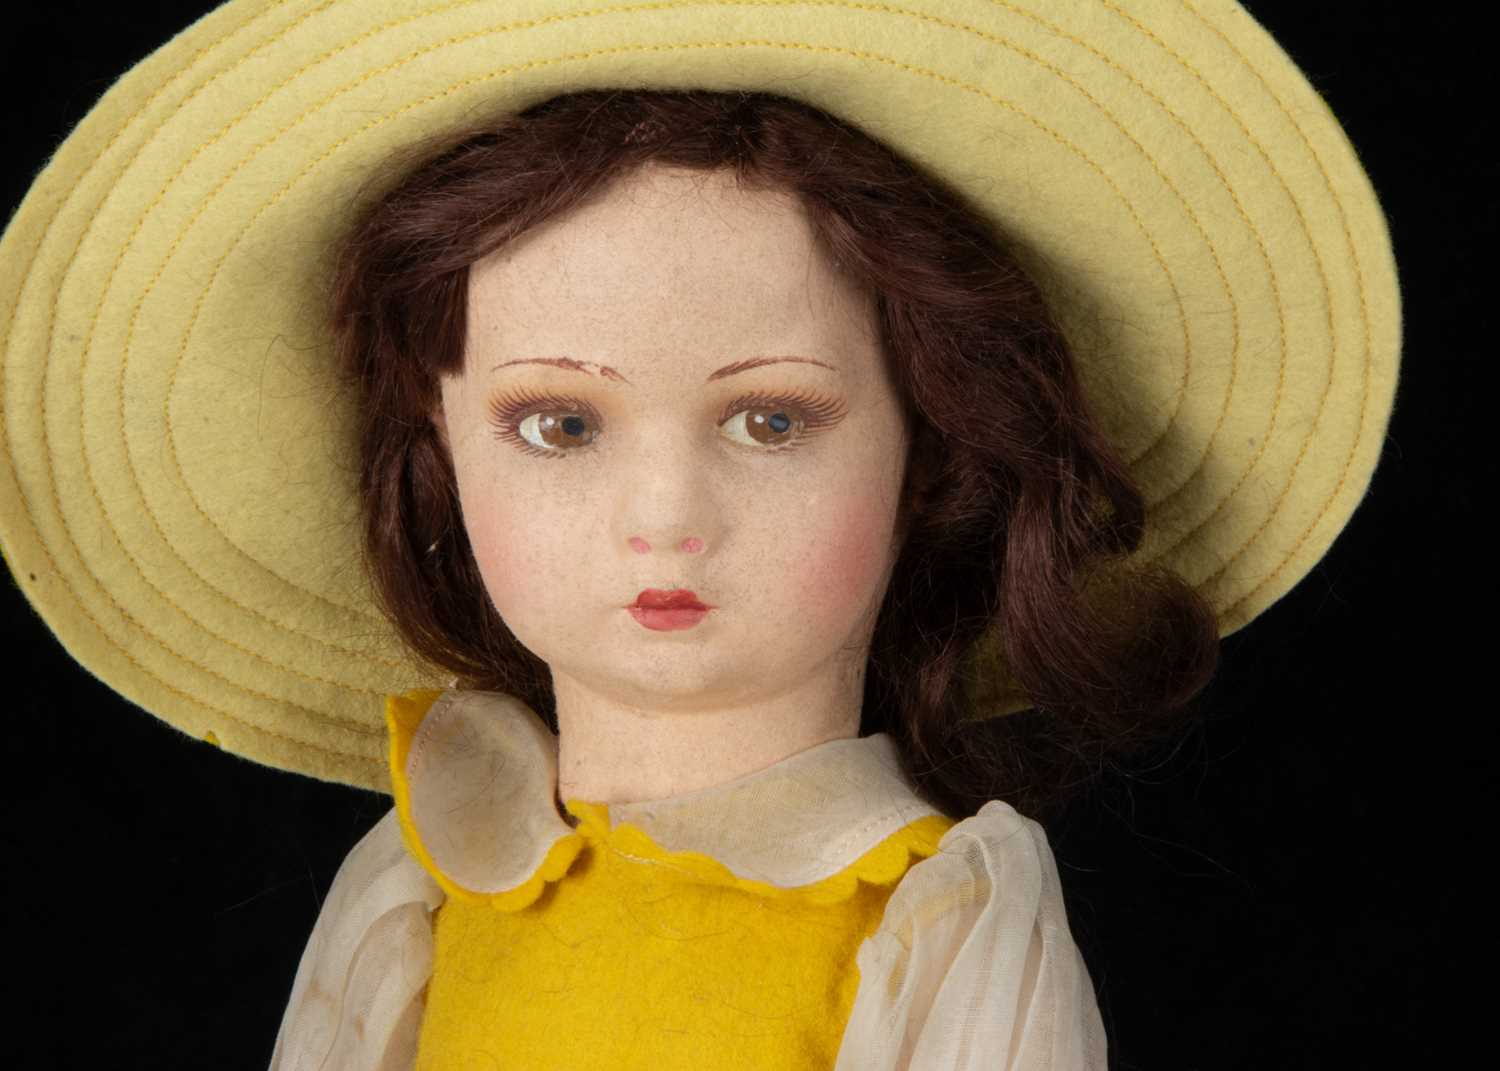 A 1930s Lenci girl doll, - Image 3 of 3